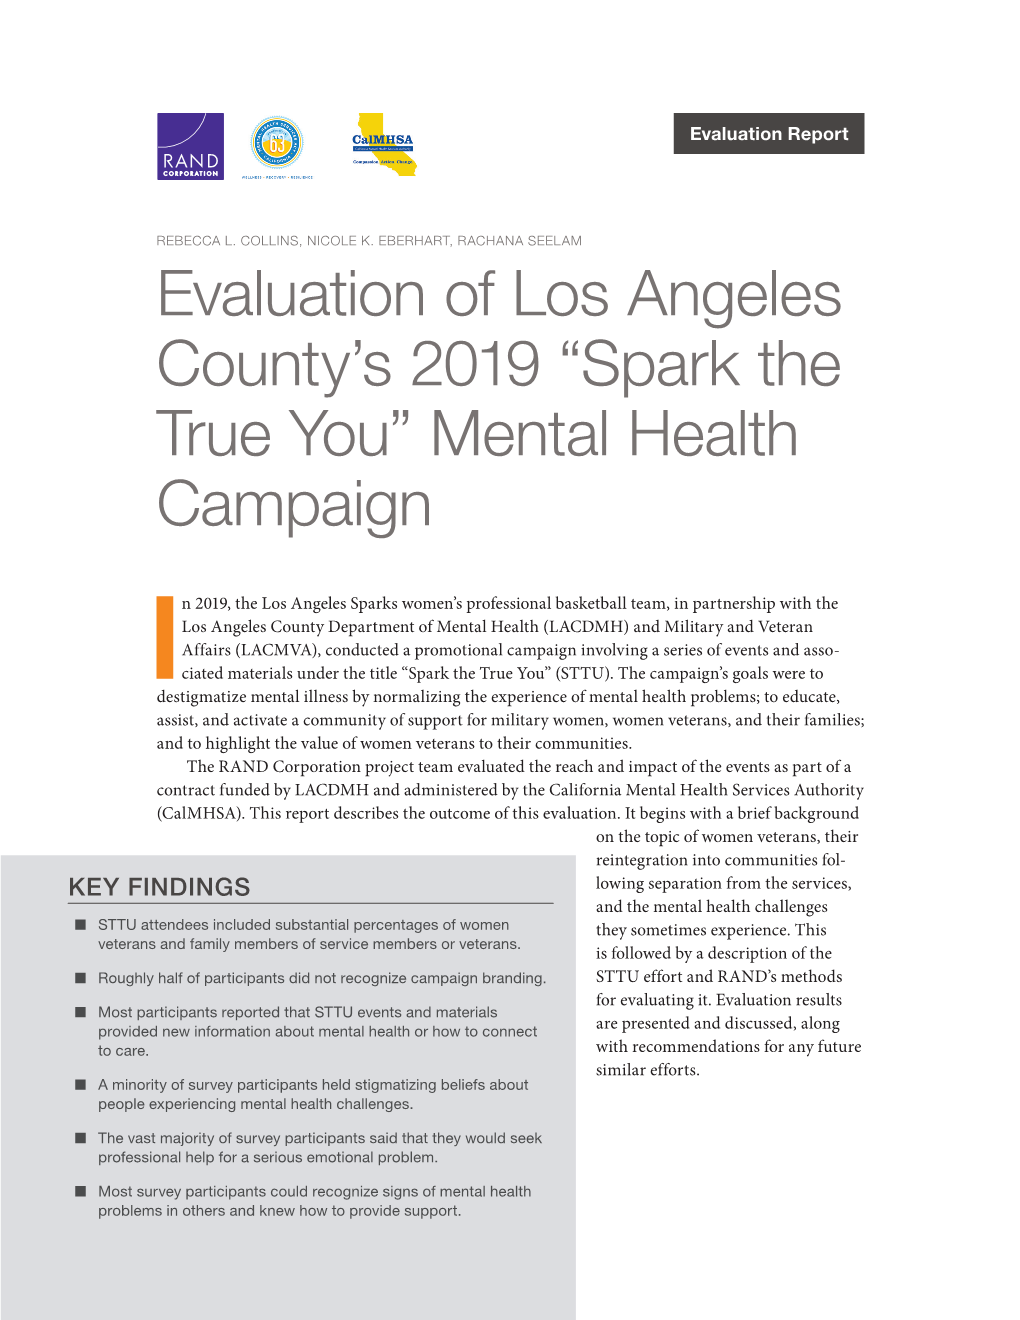 Evaluation of Los Angeles County's 2019 "Spark the True You" Mental